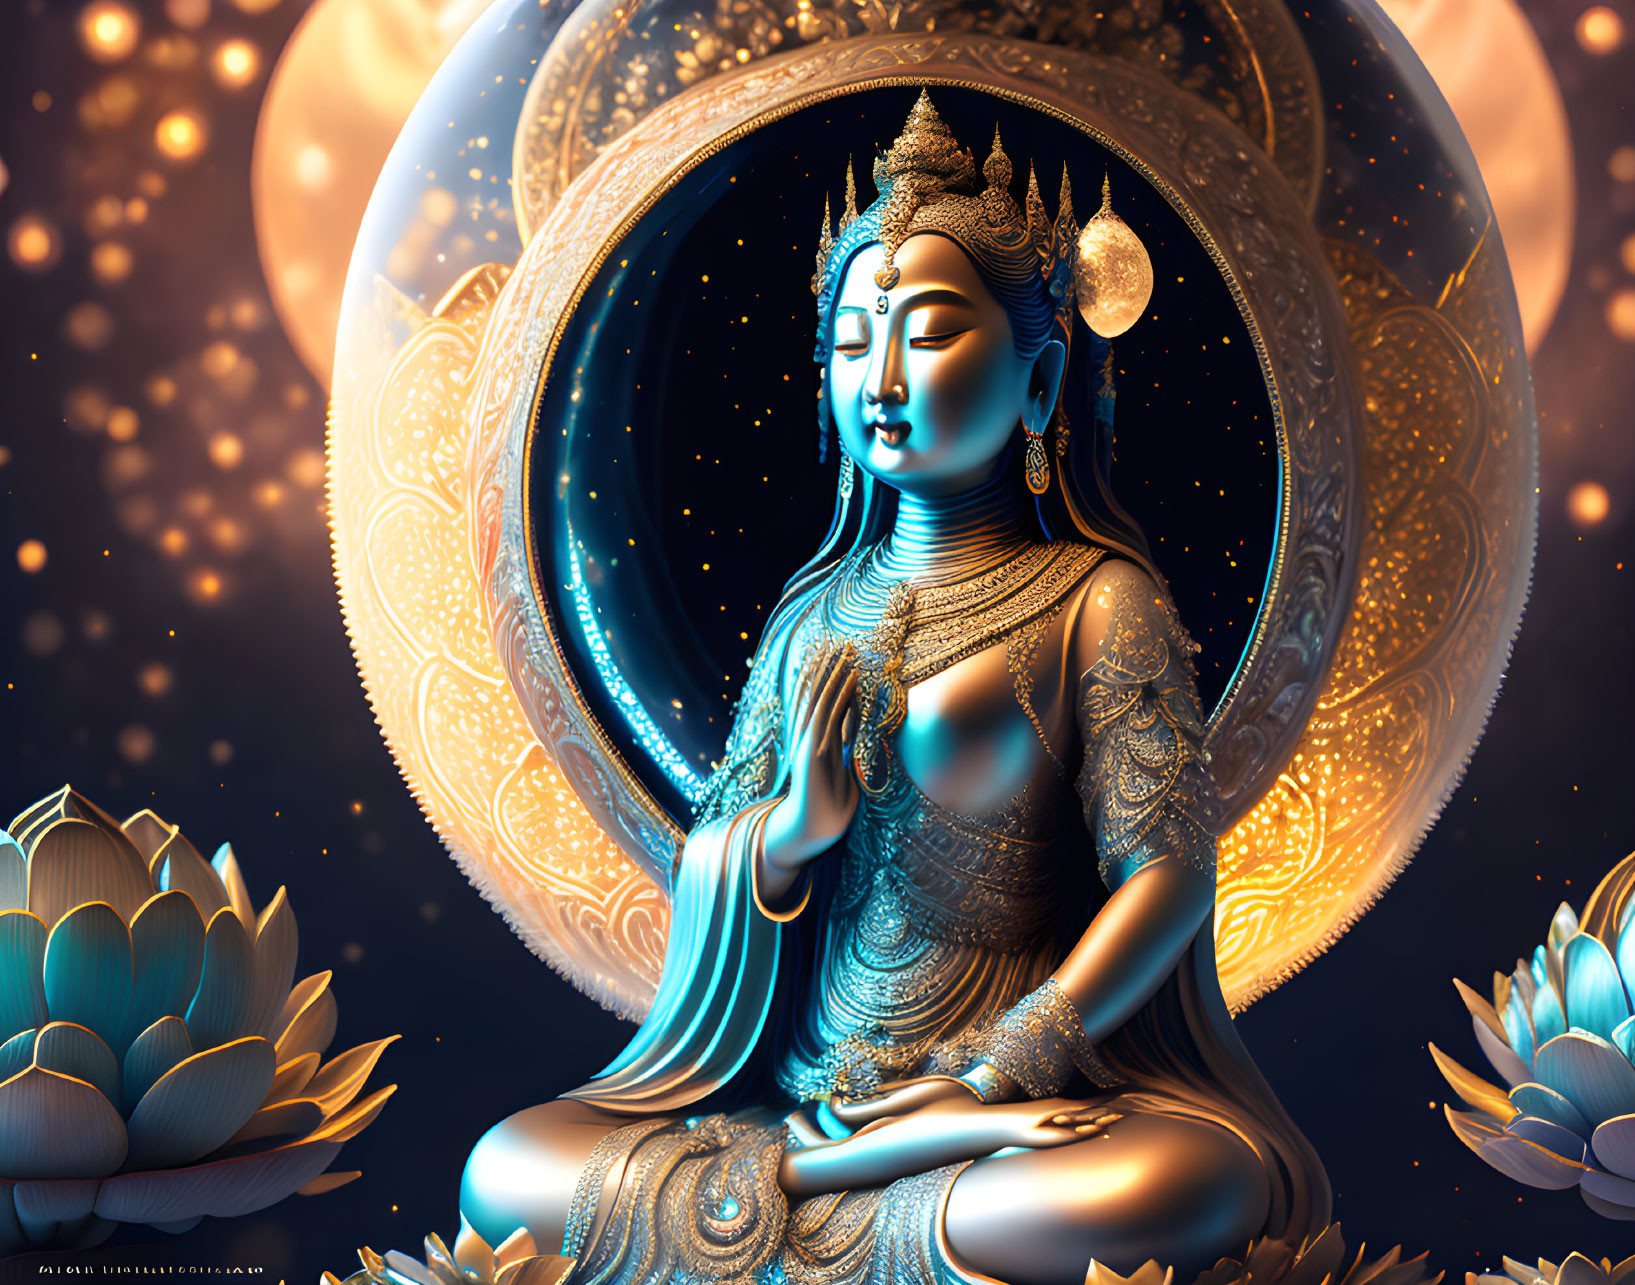 Blue-skinned deity meditating in golden attire with lotus flowers and crescent moon